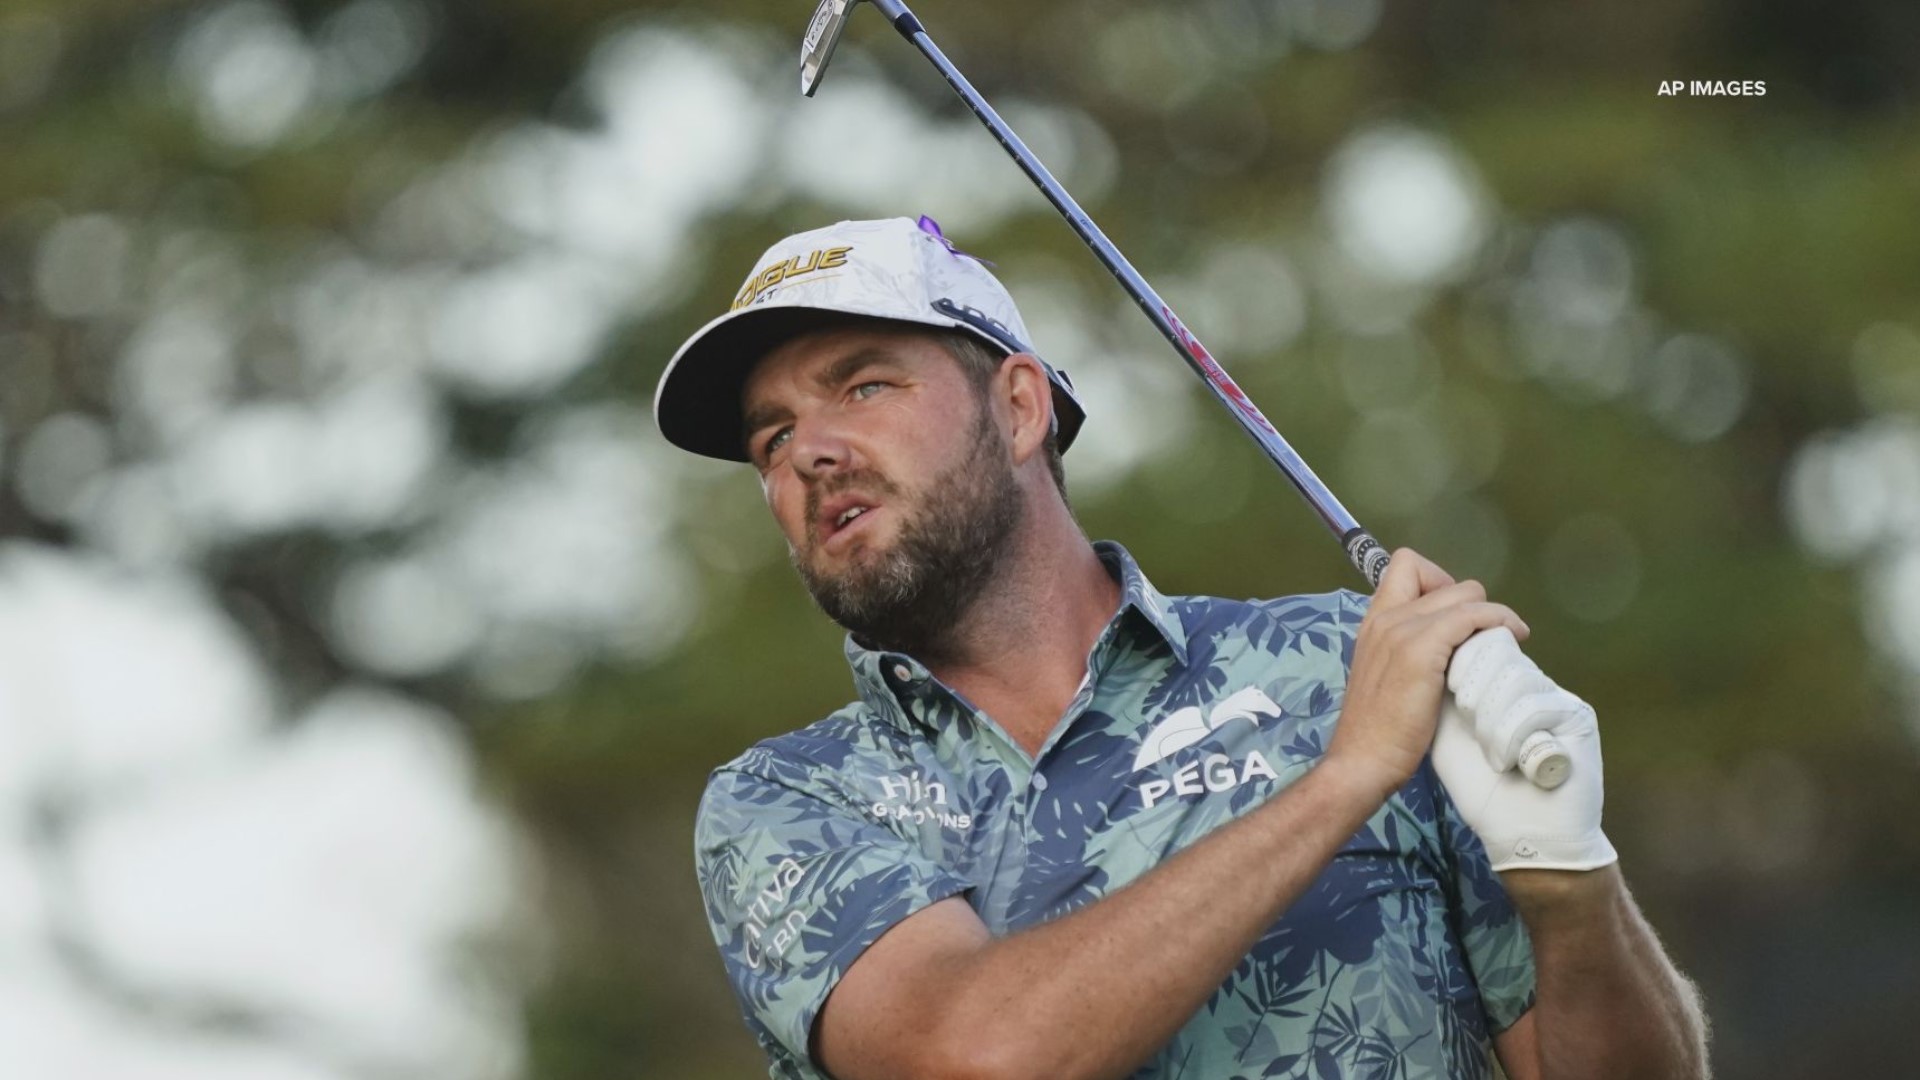 Marc Leishman has yet to win on tour this year, but in 13 events, the Australian has finished 3rd once to go with 3 top-10's and 7 times in the top-25.